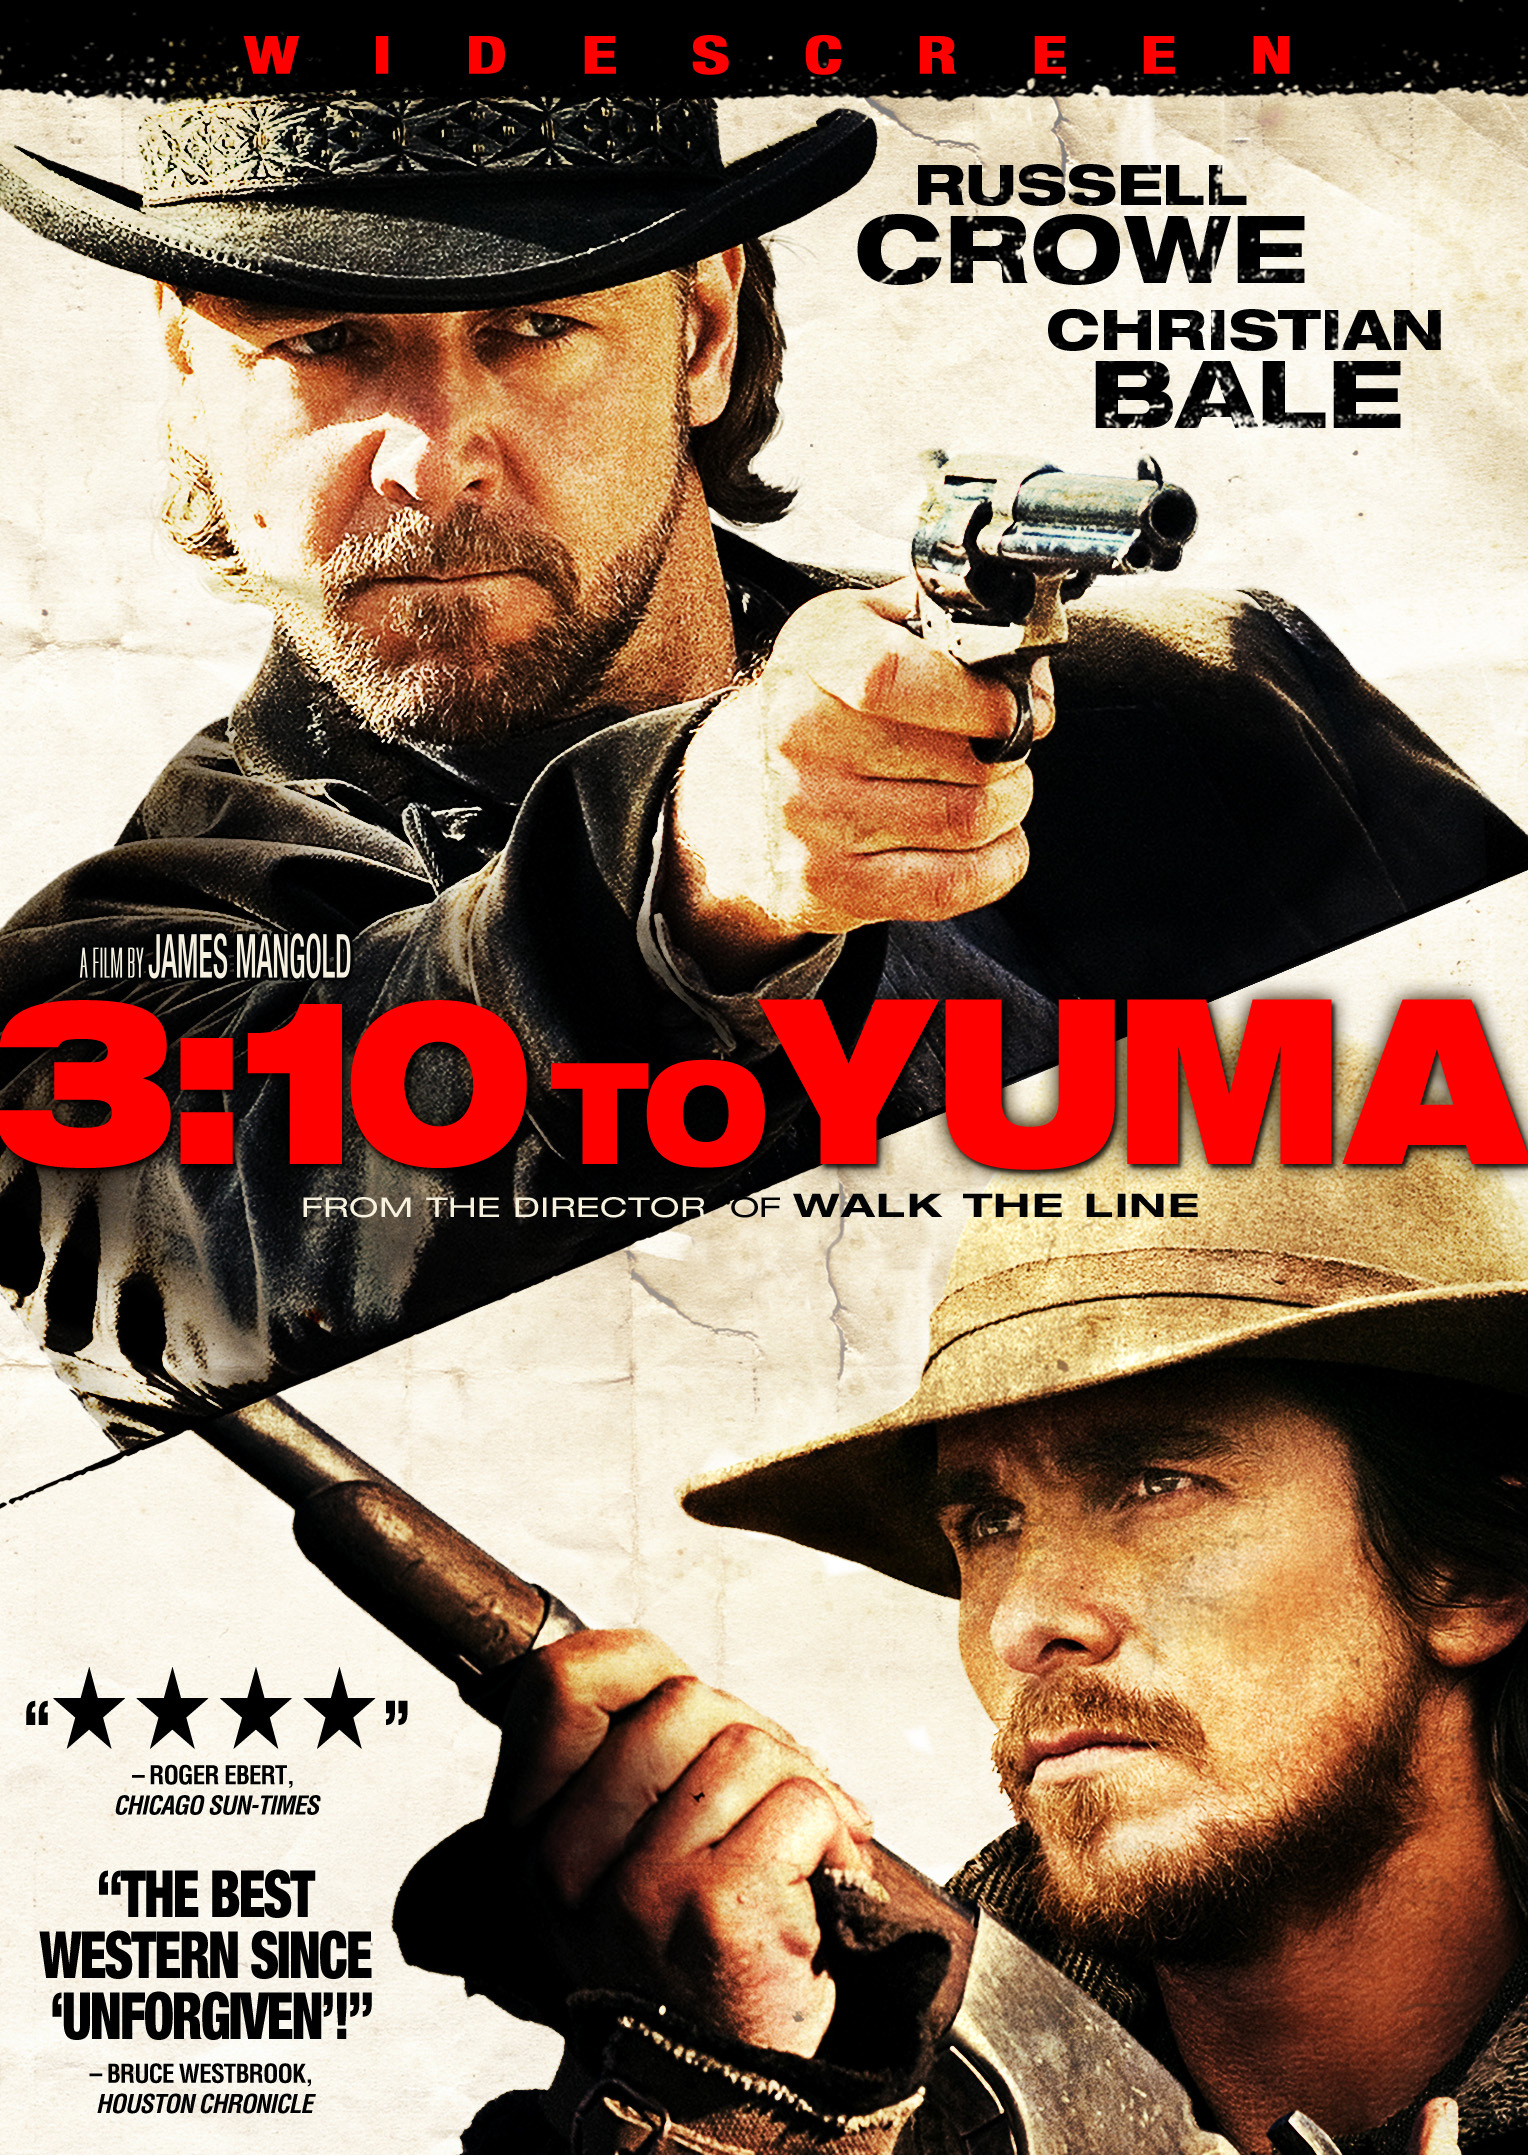 3:10 To Yuma (Widescreen) - DVD [ 2007 ]  - Western Movies On DVD - Movies On GRUV